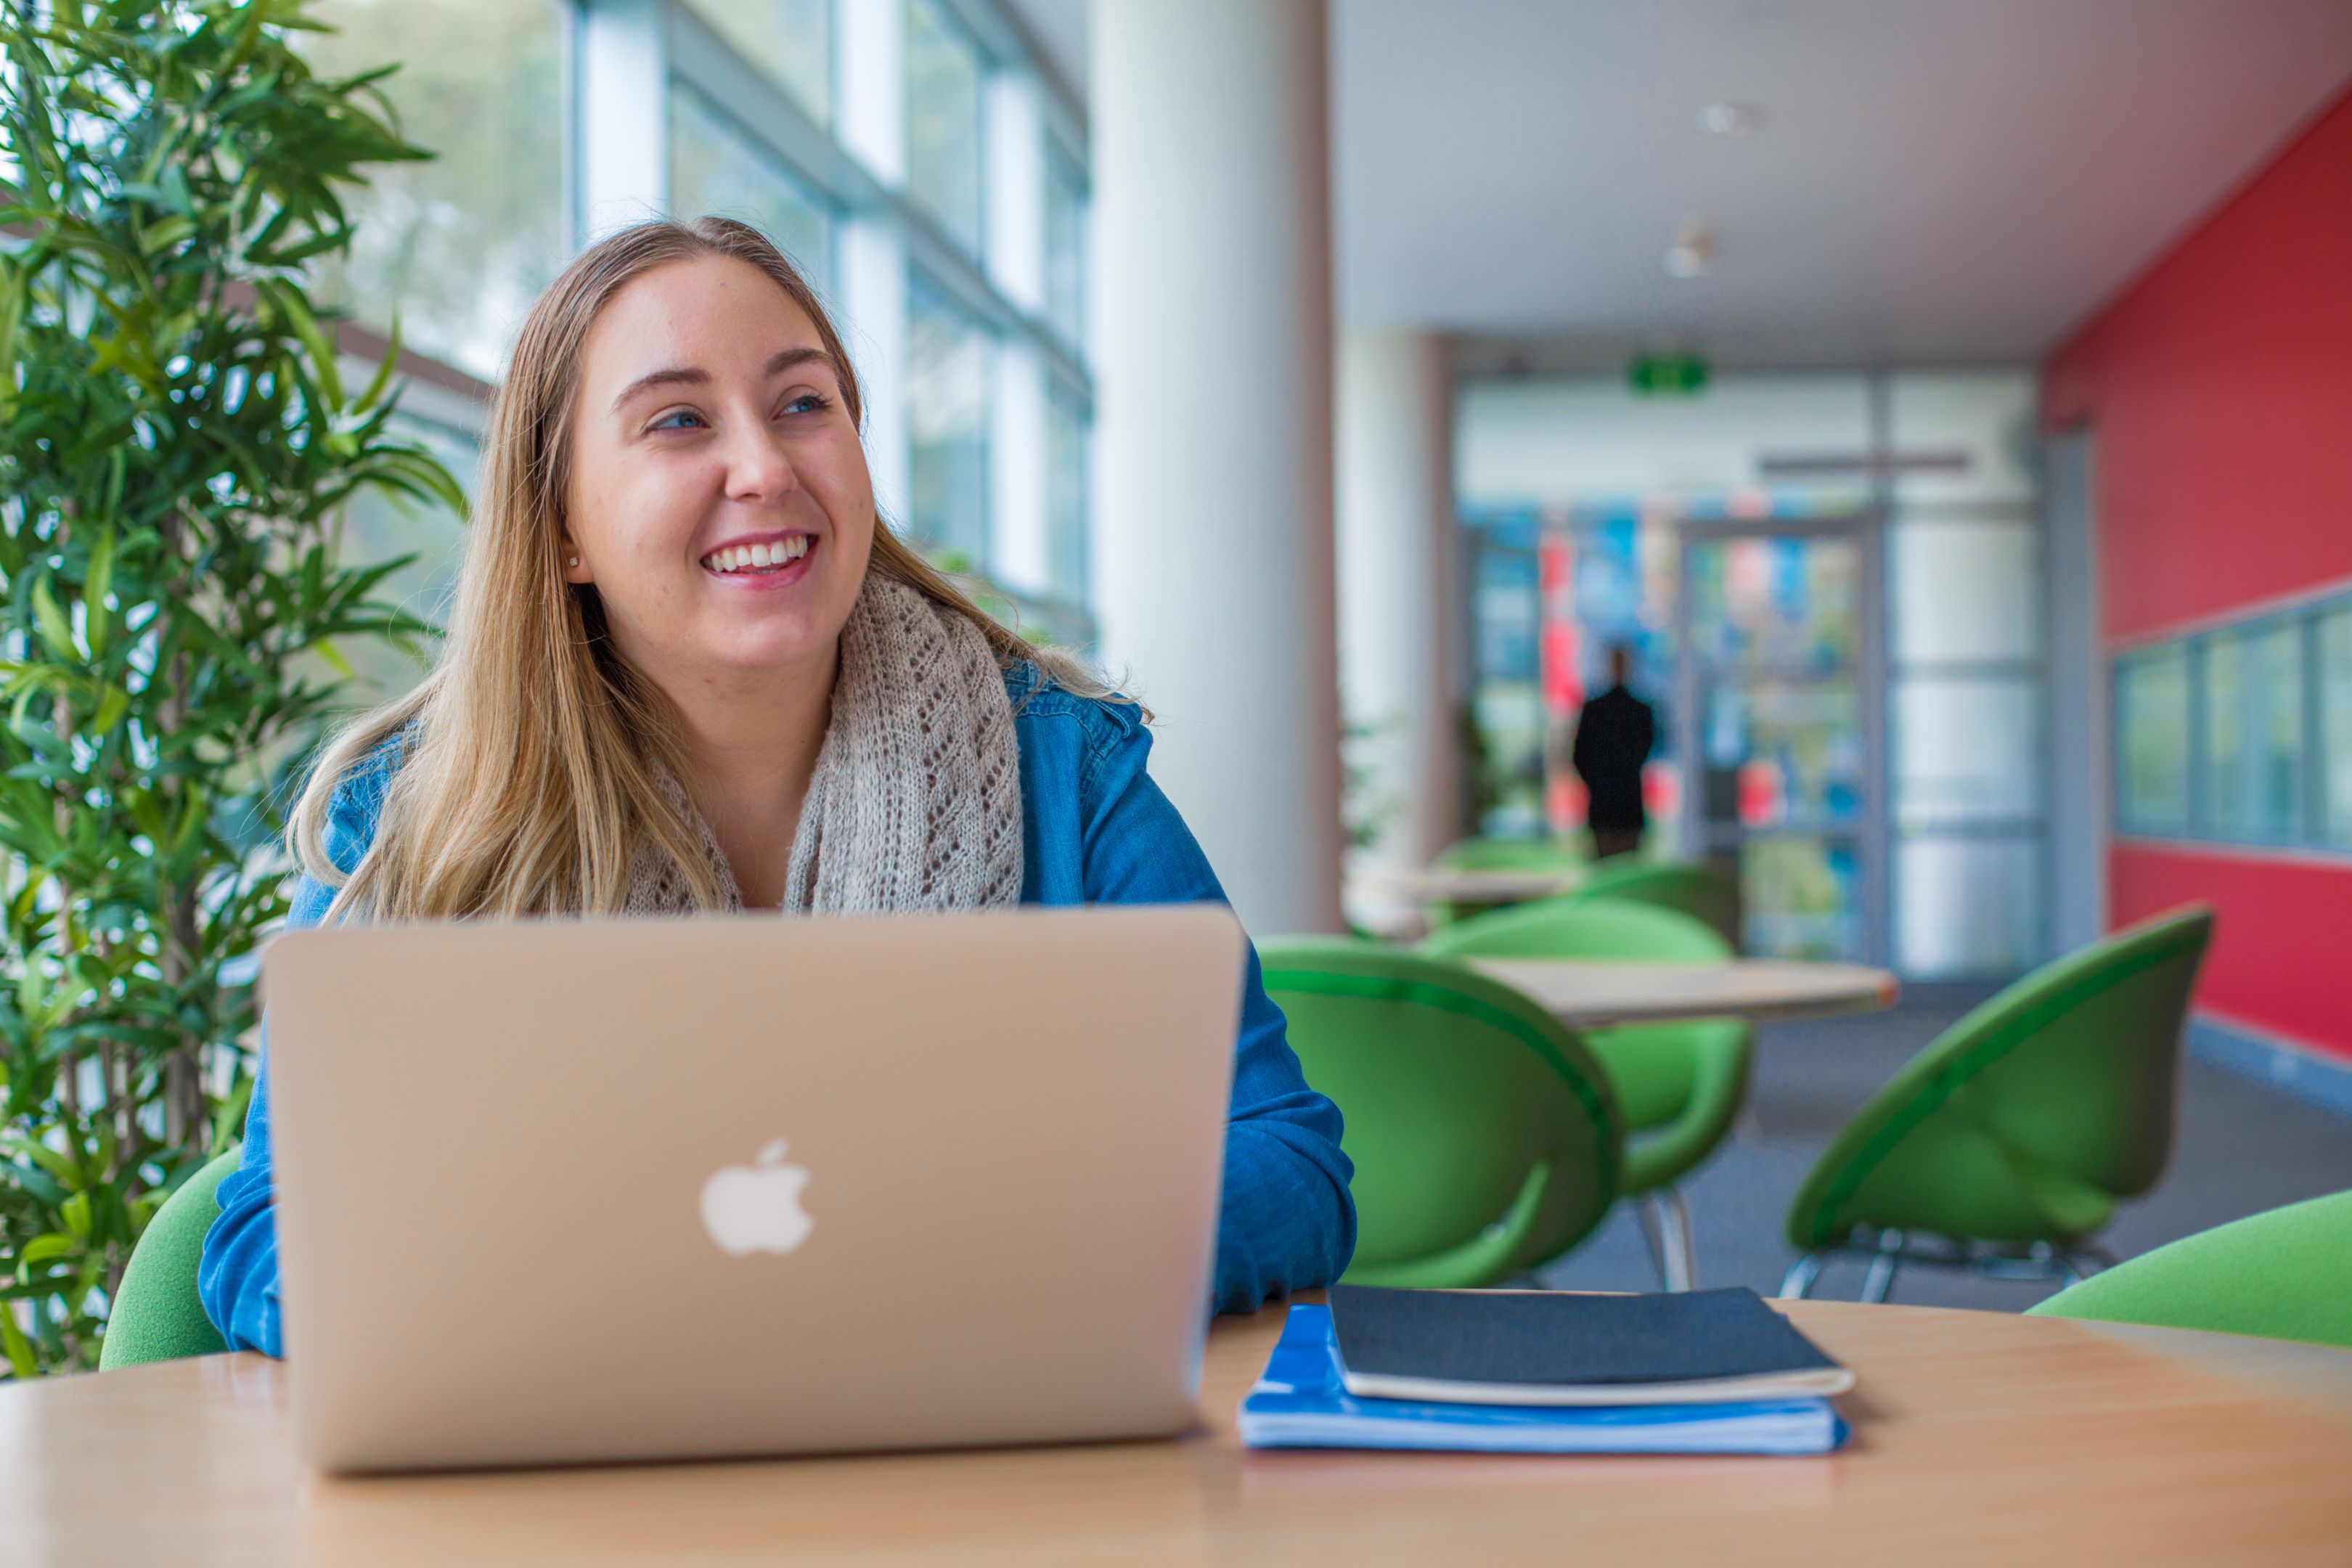 Being able to access free Wi-Fi on campus enables Jasmine to study for her degree in between classes. 